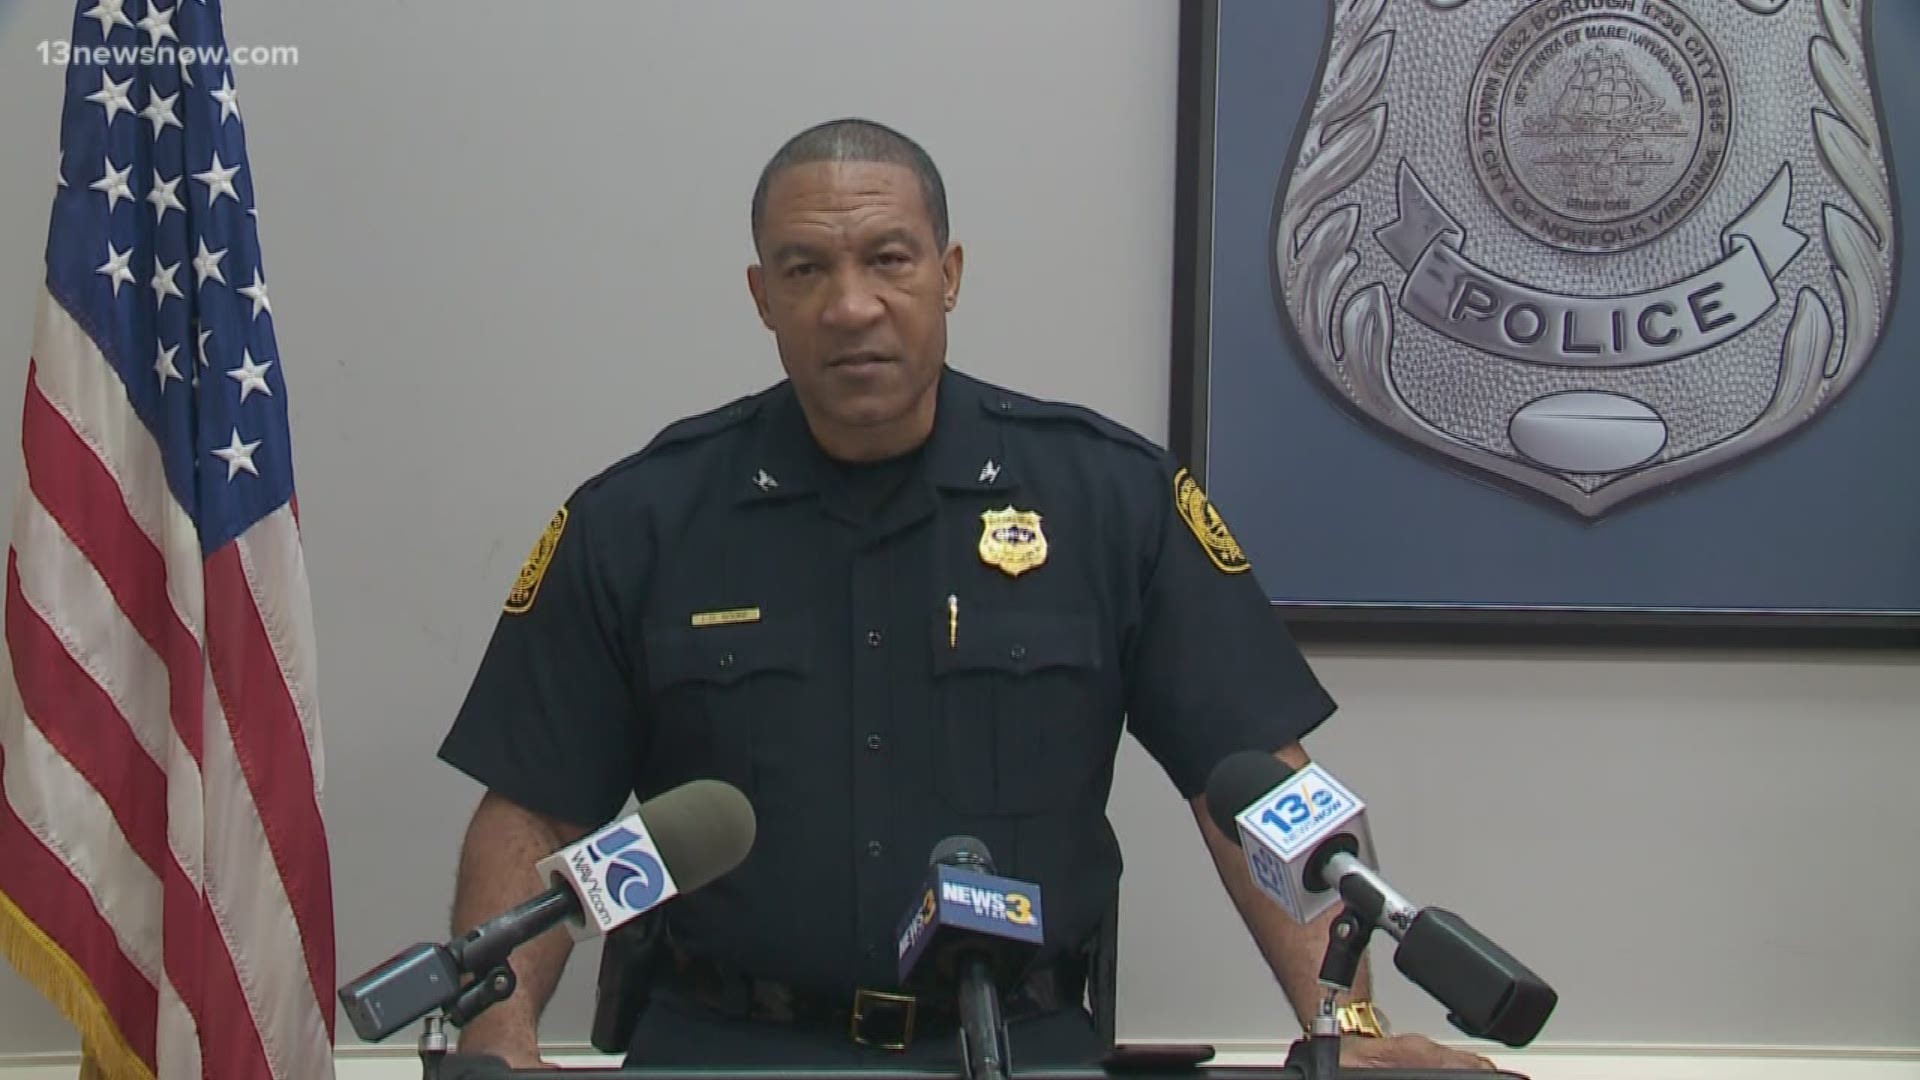 After a violent week in Norfolk, the police chief is speaking out. Chief Boone said most of the shootings stem from arguments. According to the Chief, Thursday night someone shot two people because they parked in front of the shooters house.